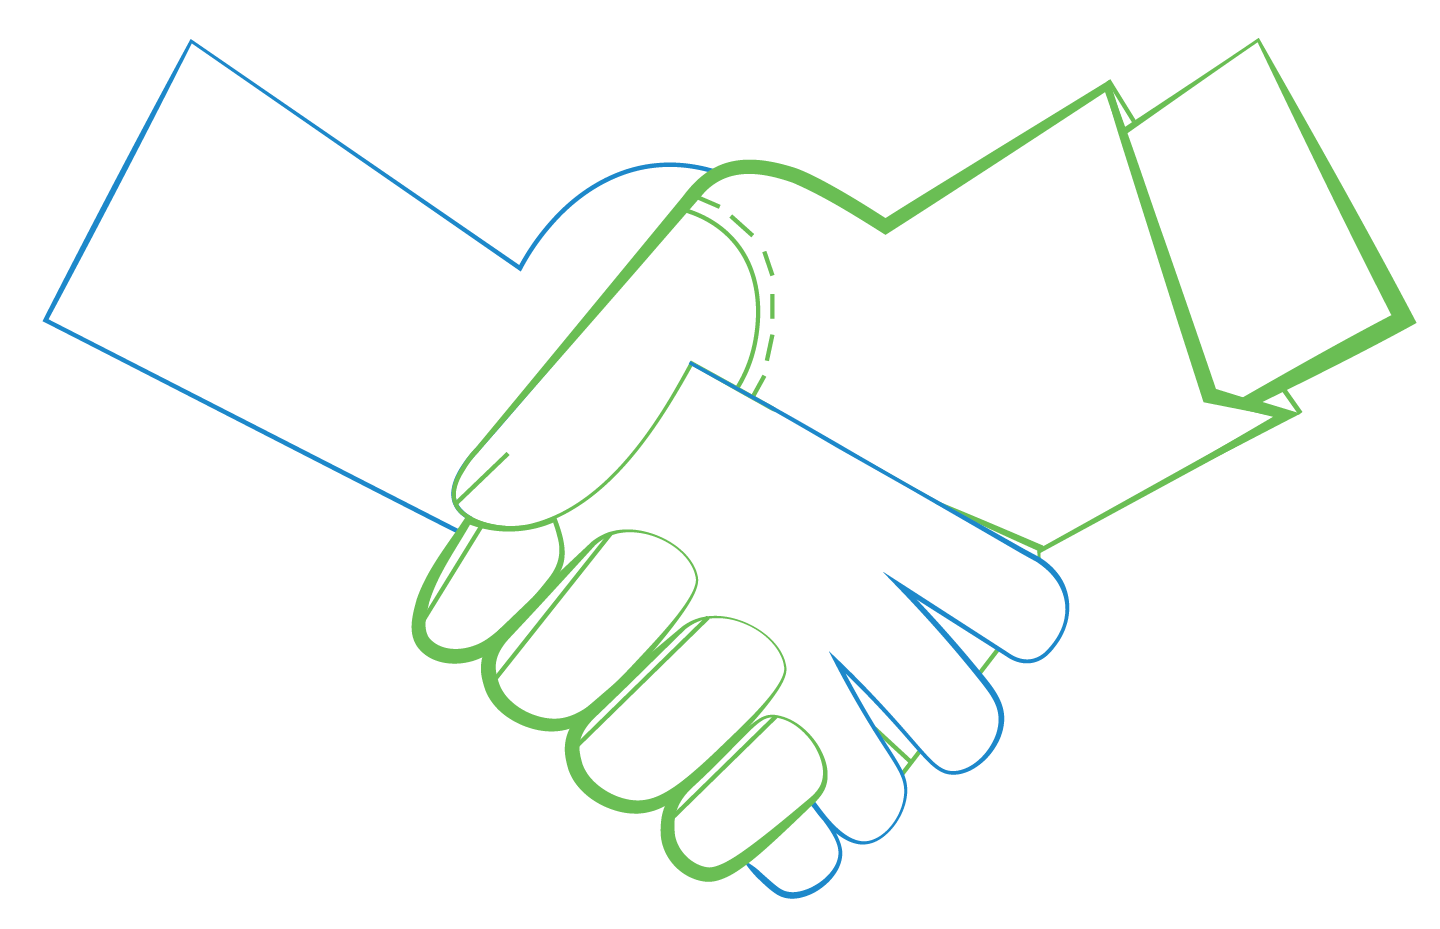 line-drawing of a hand sketched in blue shaking hands with another wearing a gardening/work glove, sketched in green